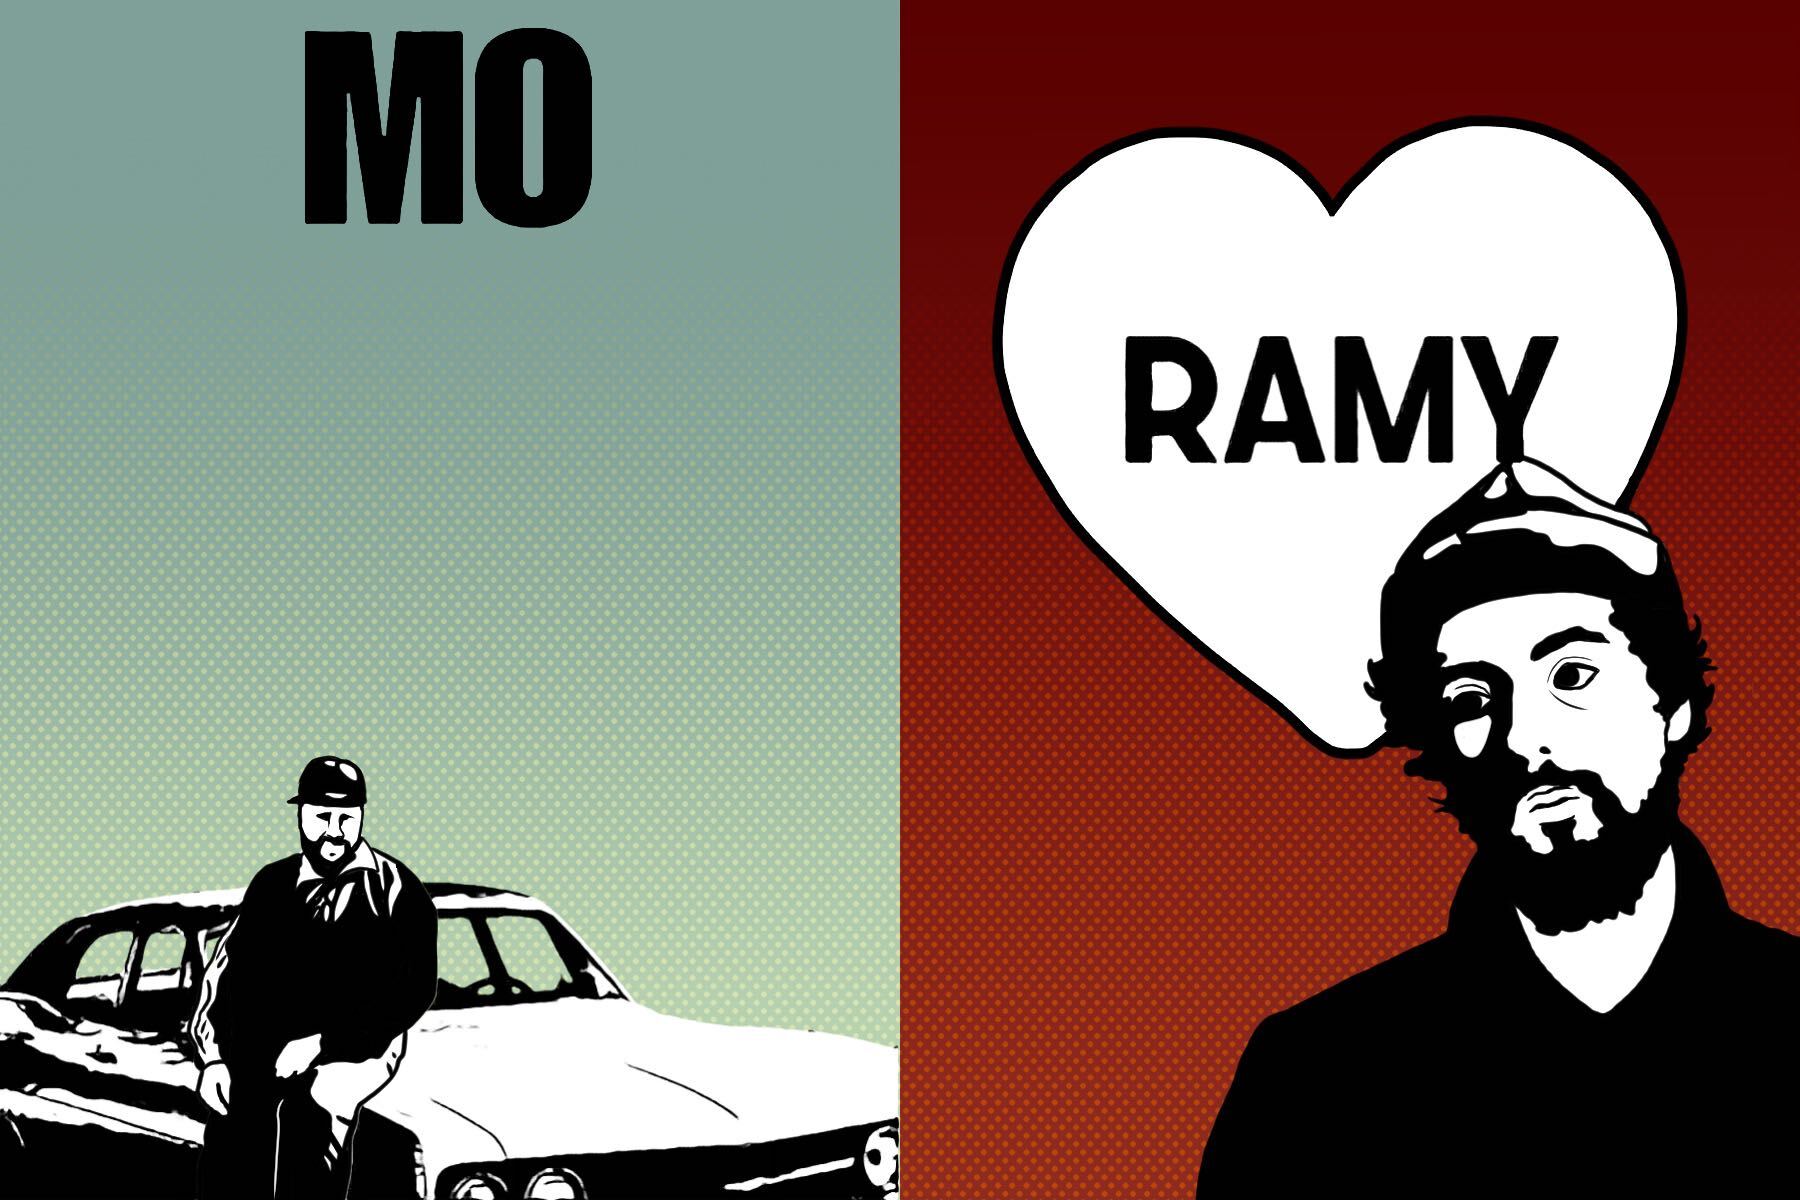 A drawing of Ramy and Mo shows the two characters side-by-side